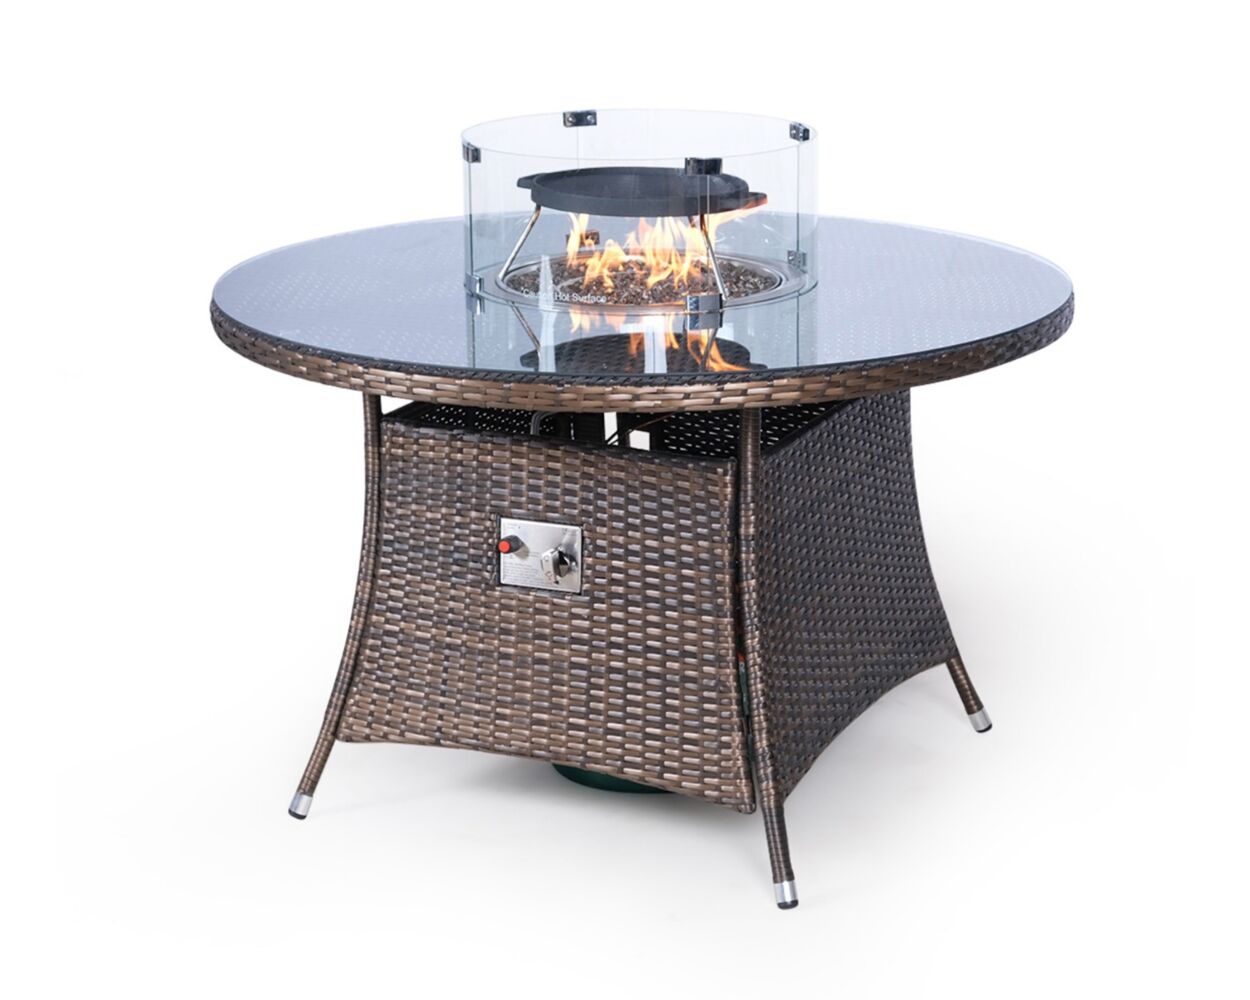 Giardino Round 4 Seater Rattan Patio Dining Table with Firepit - Brown